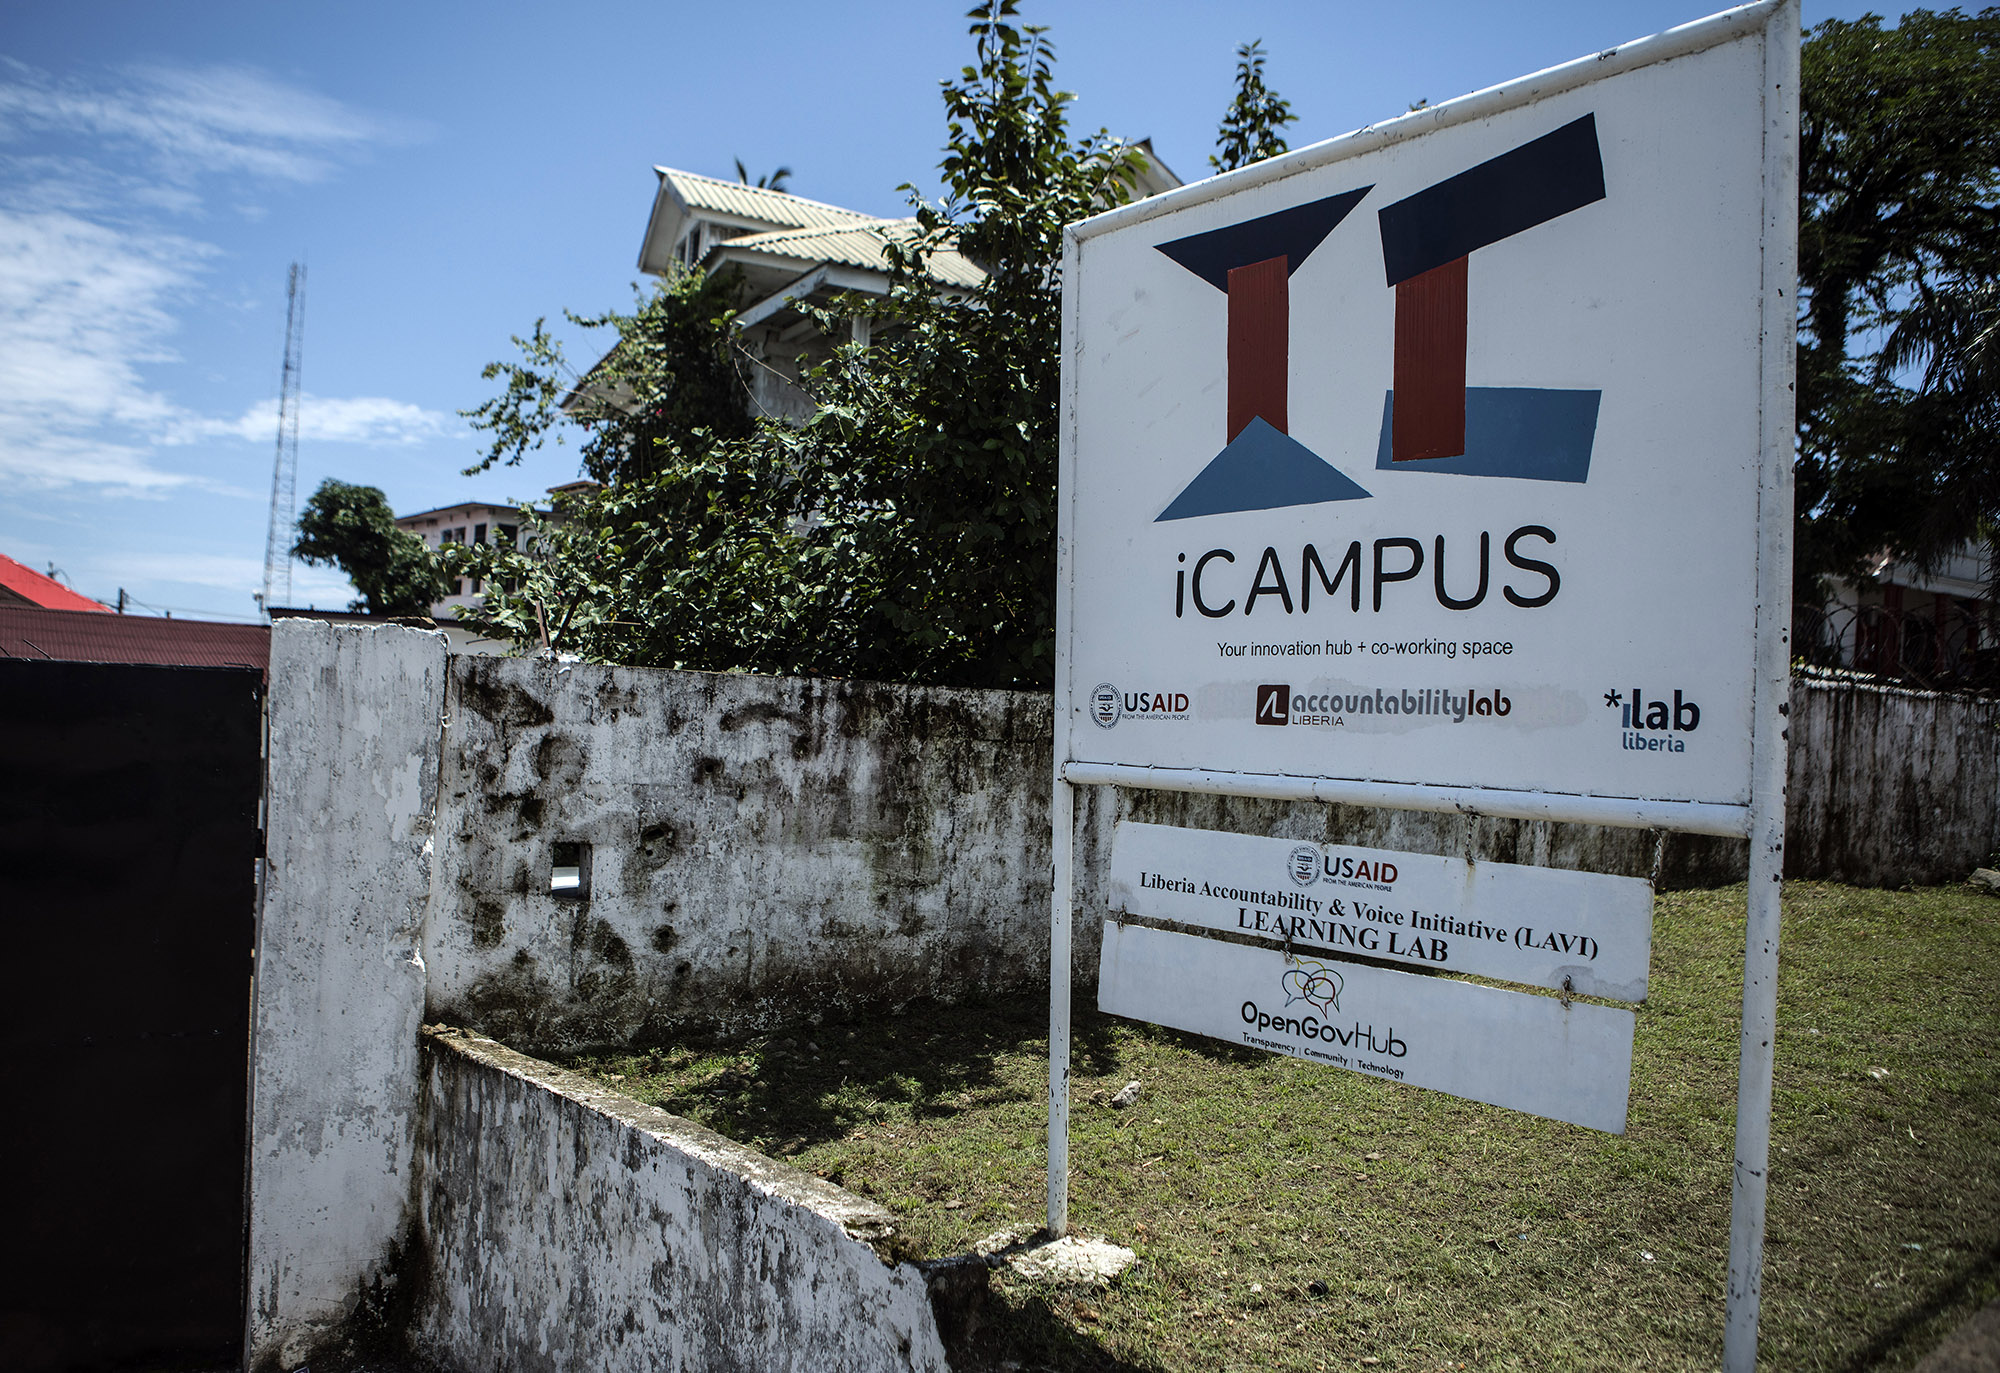  The Accountability Lab building located inside the iCampus in Monrovia, Liberia. iCampus is a shared working space for organizations who focus on technology, accountability and social change in Liberia. It is a focal point for open governance work. 